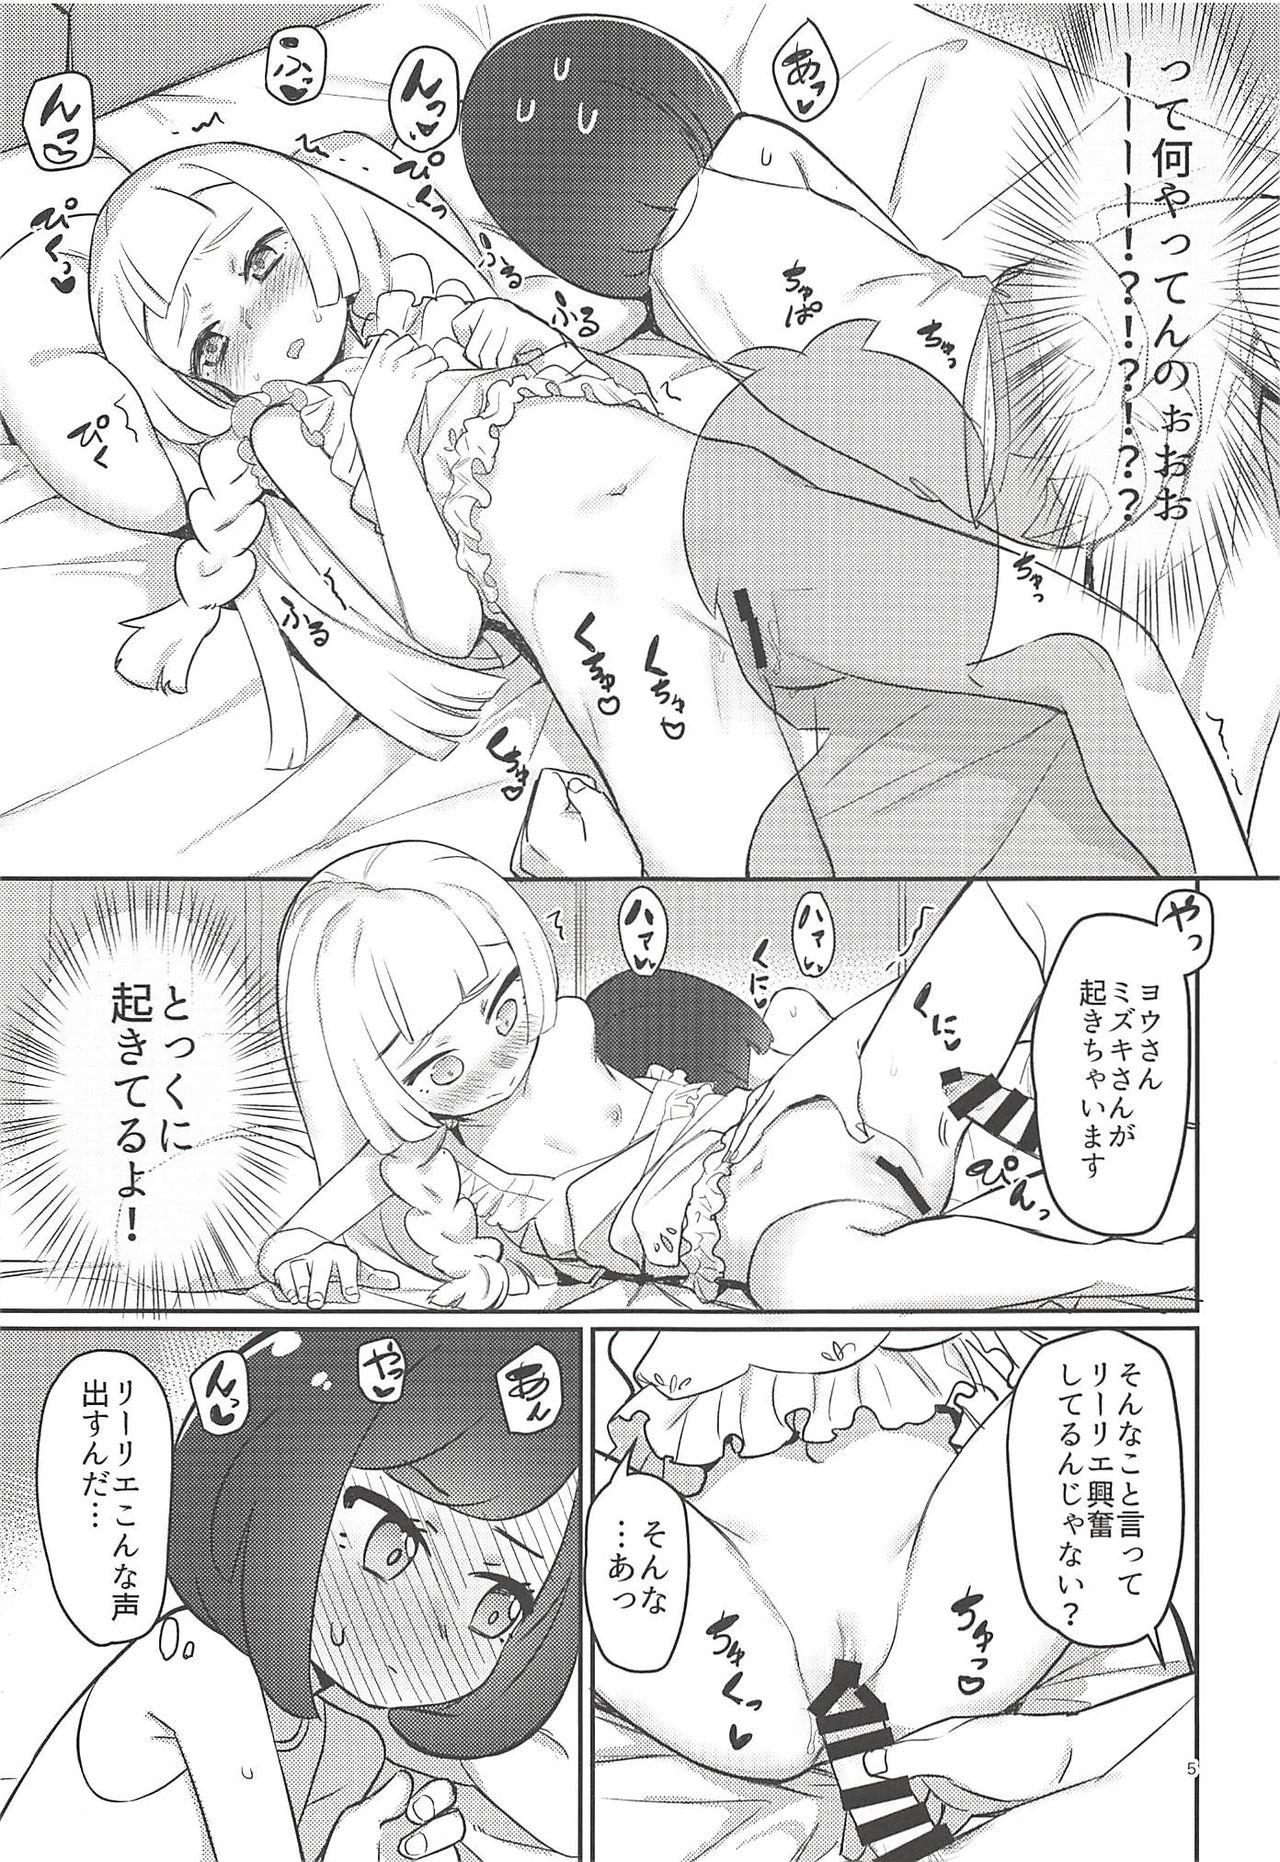 From Oshiete Lillie - Pokemon Squirt - Page 4